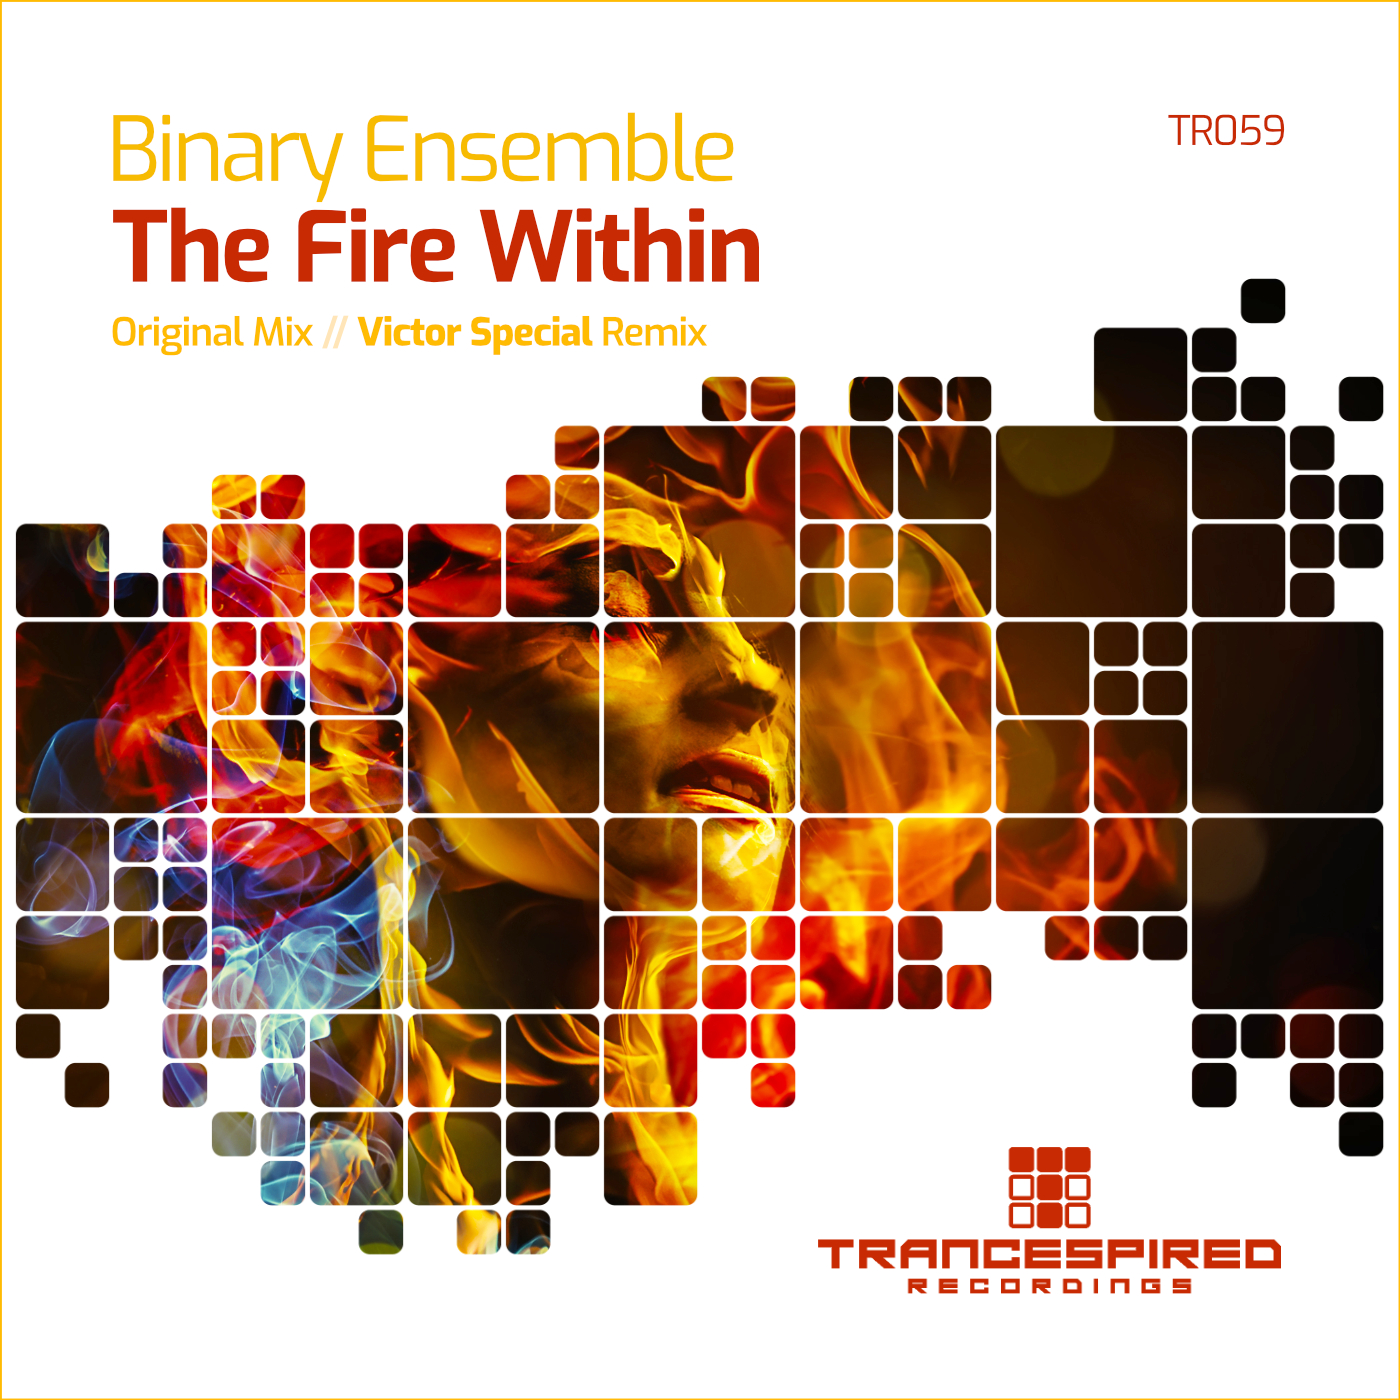 Binary Ensemble presents The Fire Within on Trancespired Recordings